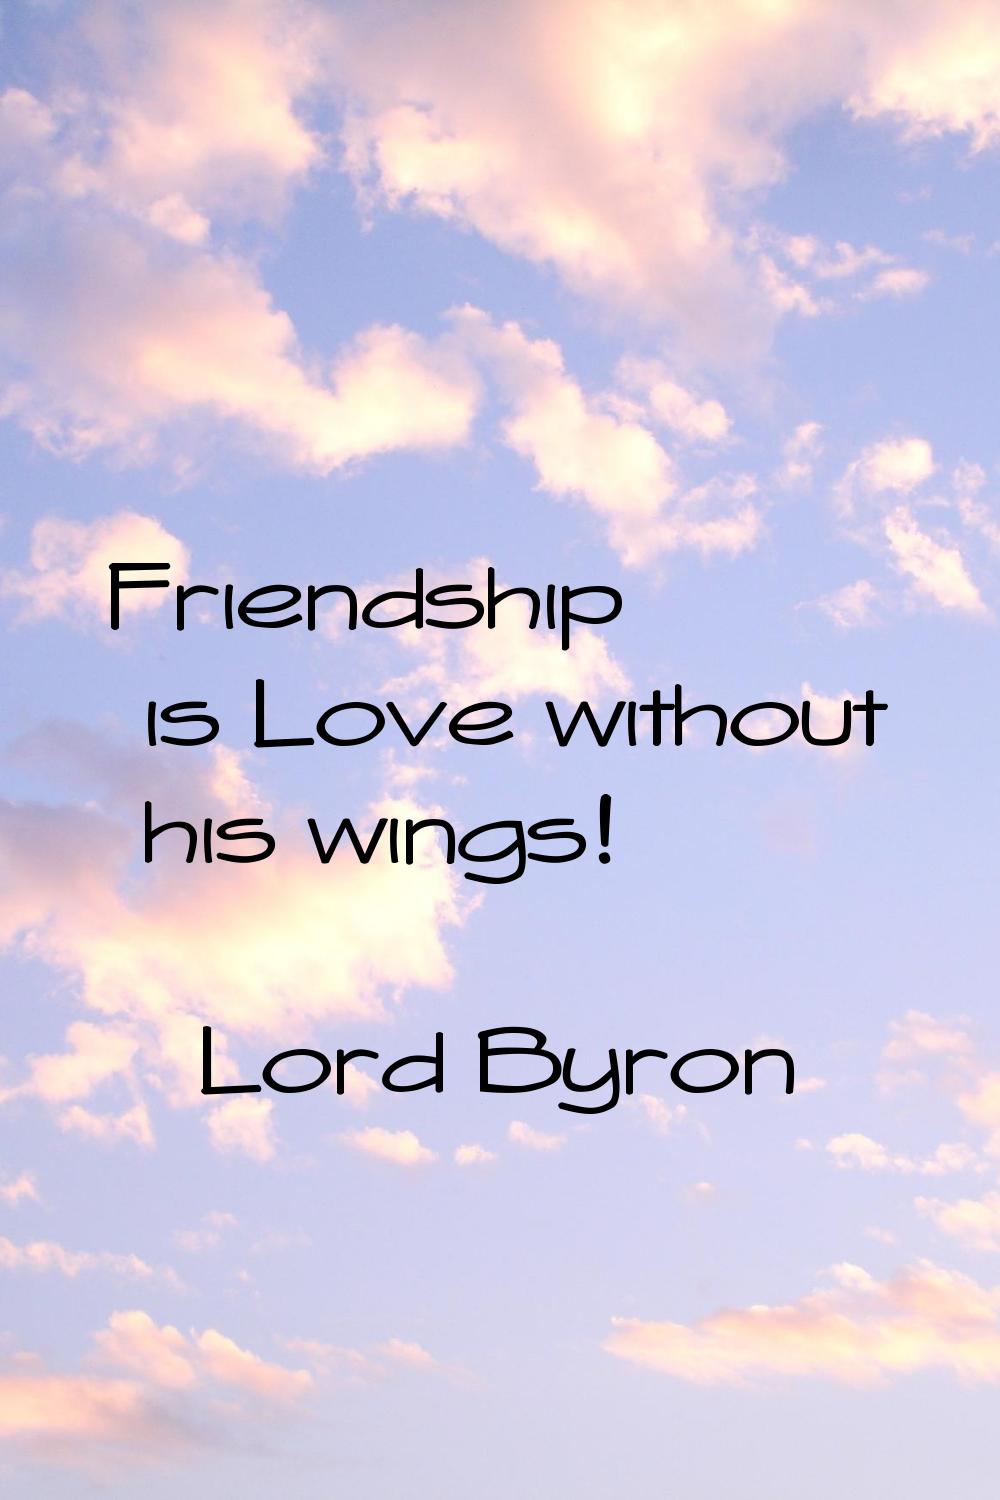 Friendship is Love without his wings!